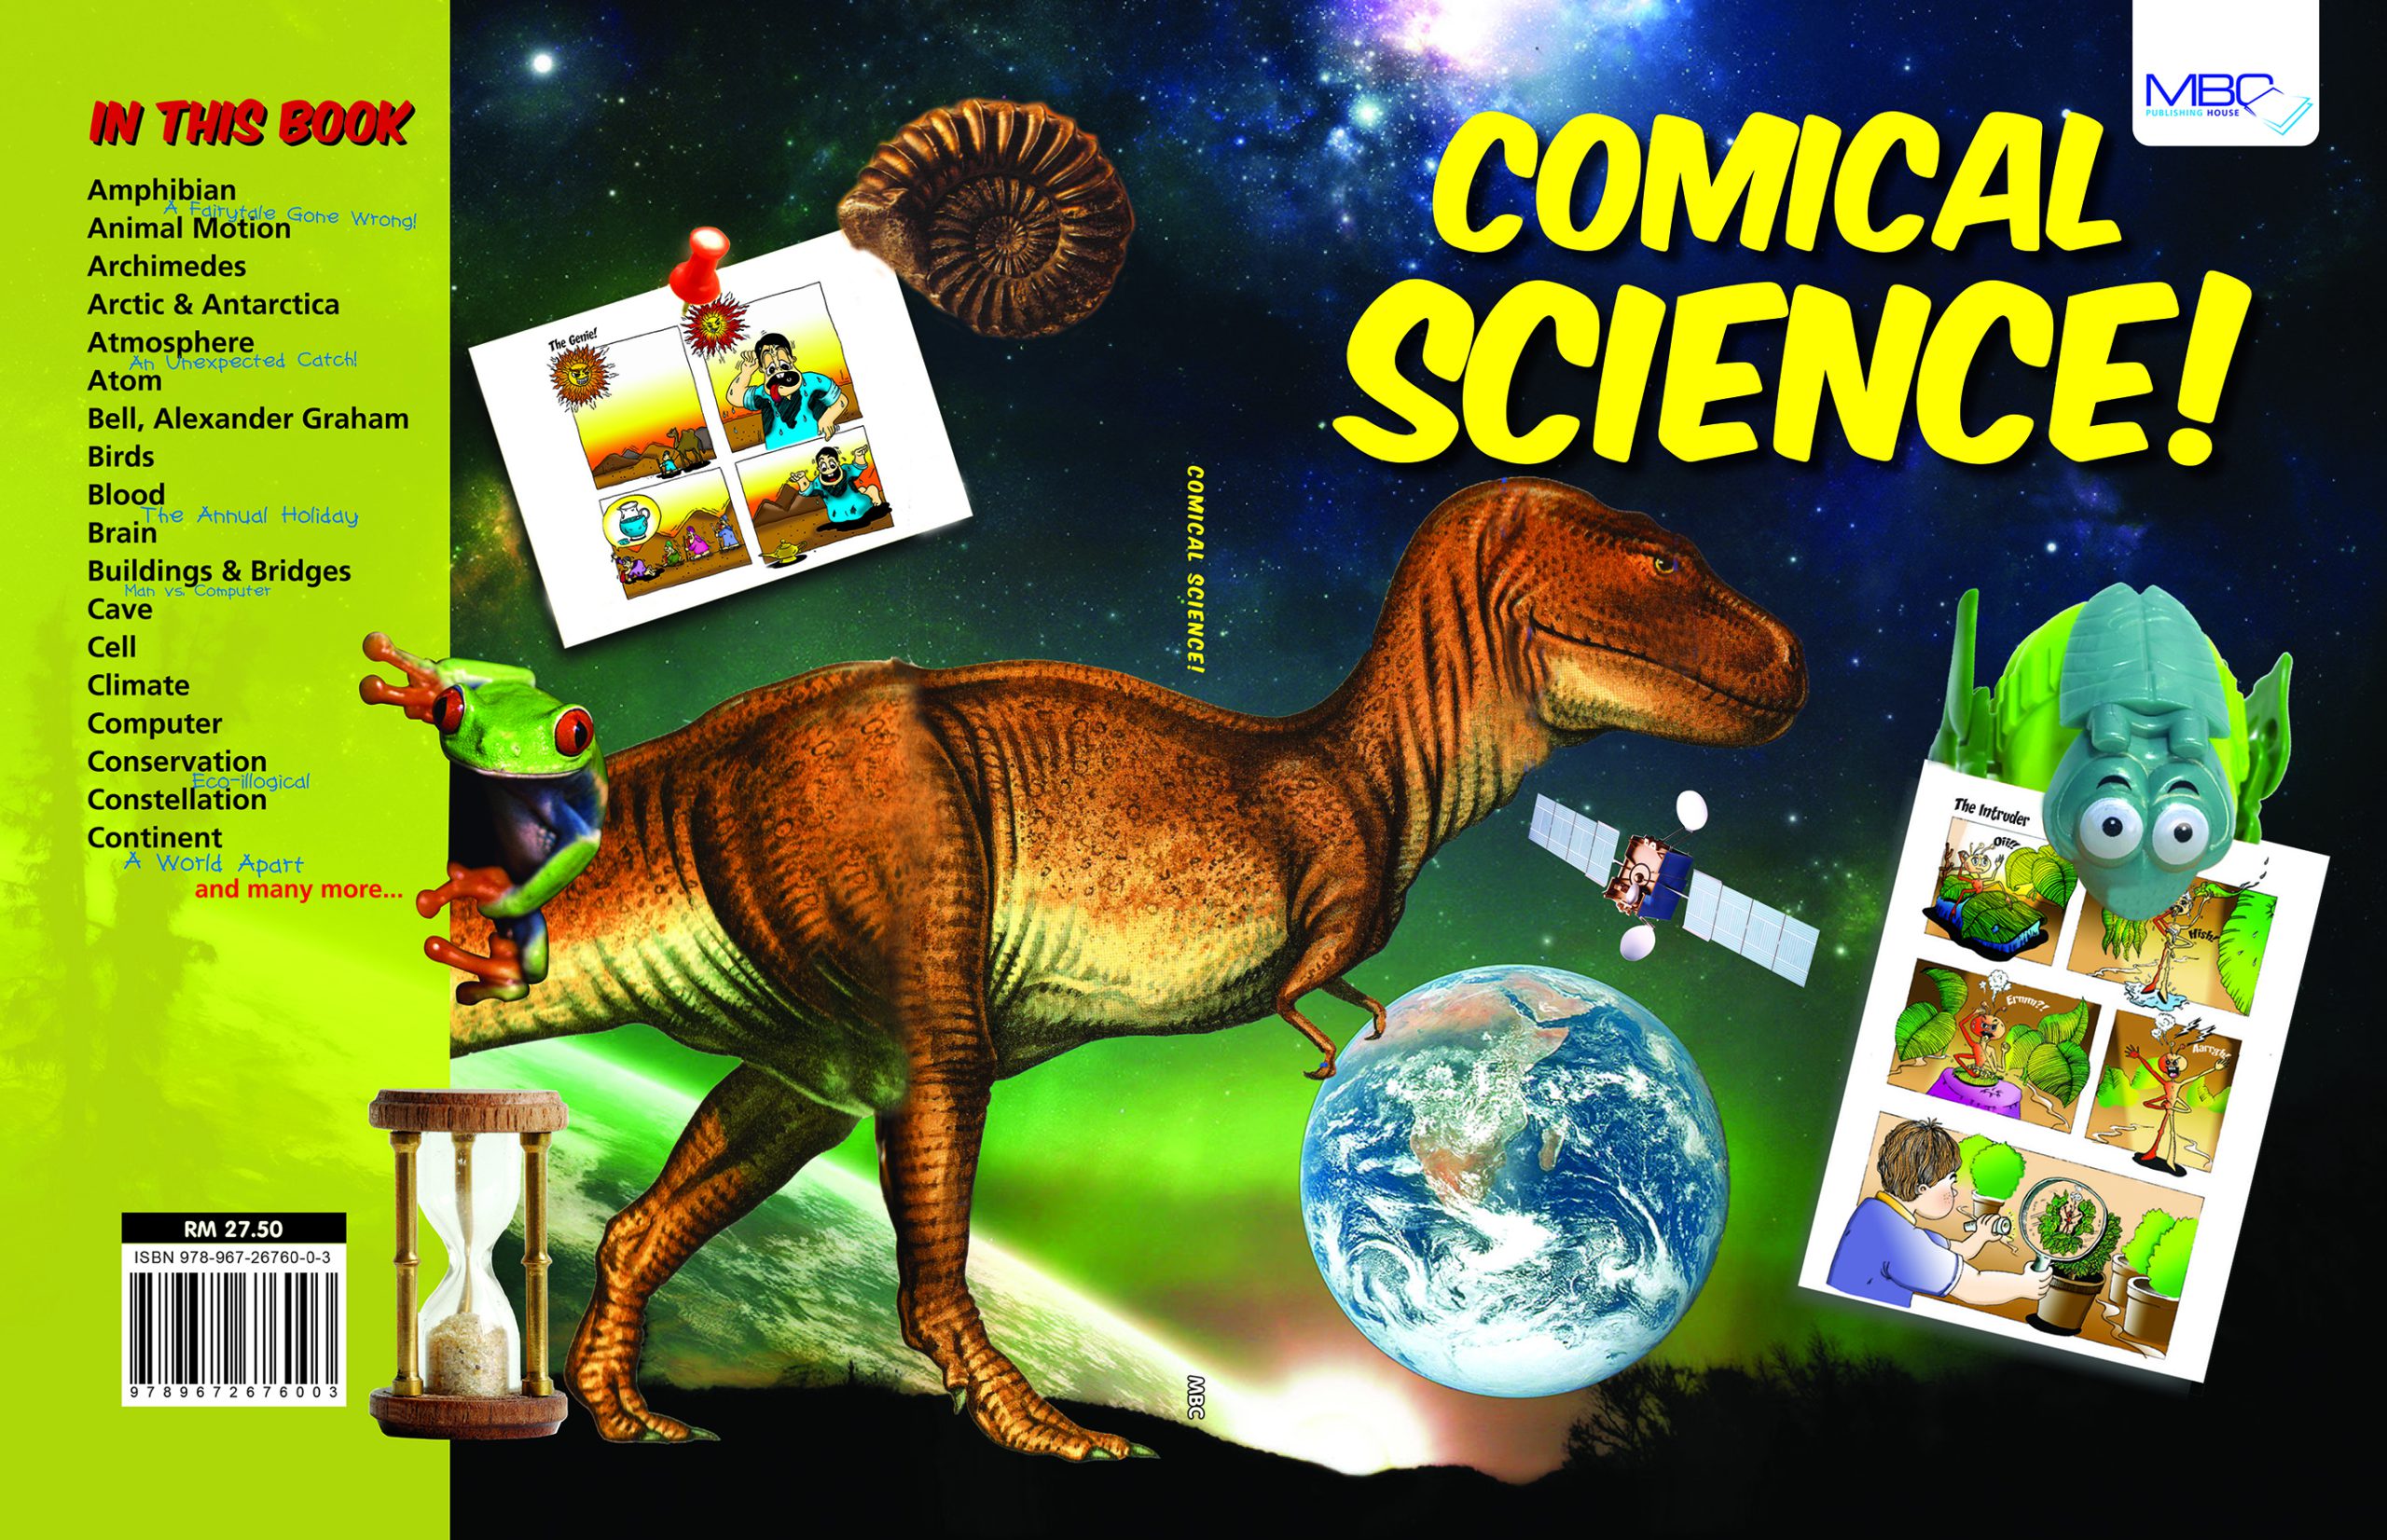 Comical Science Cover Book 01 (7)